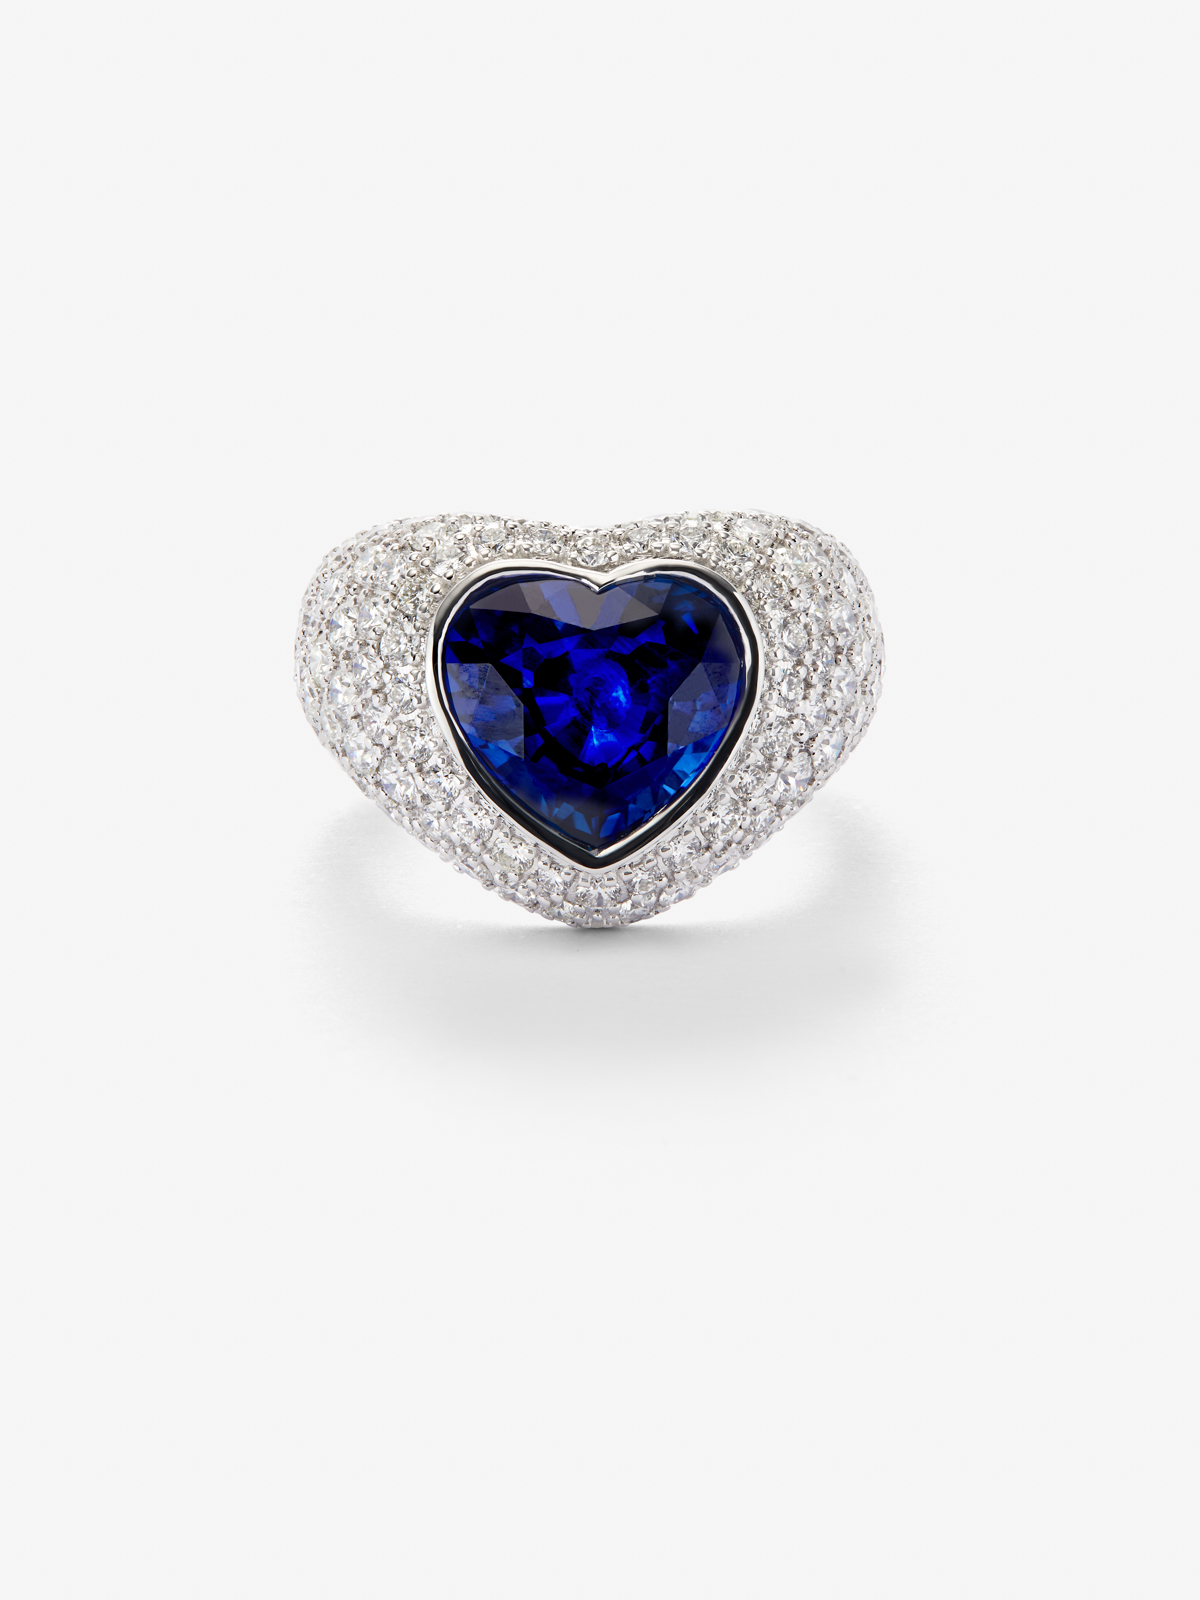 18K White Gold Ring with white diamond pavement in 2.22 cts and blue sapphire in 4.47 cts heart